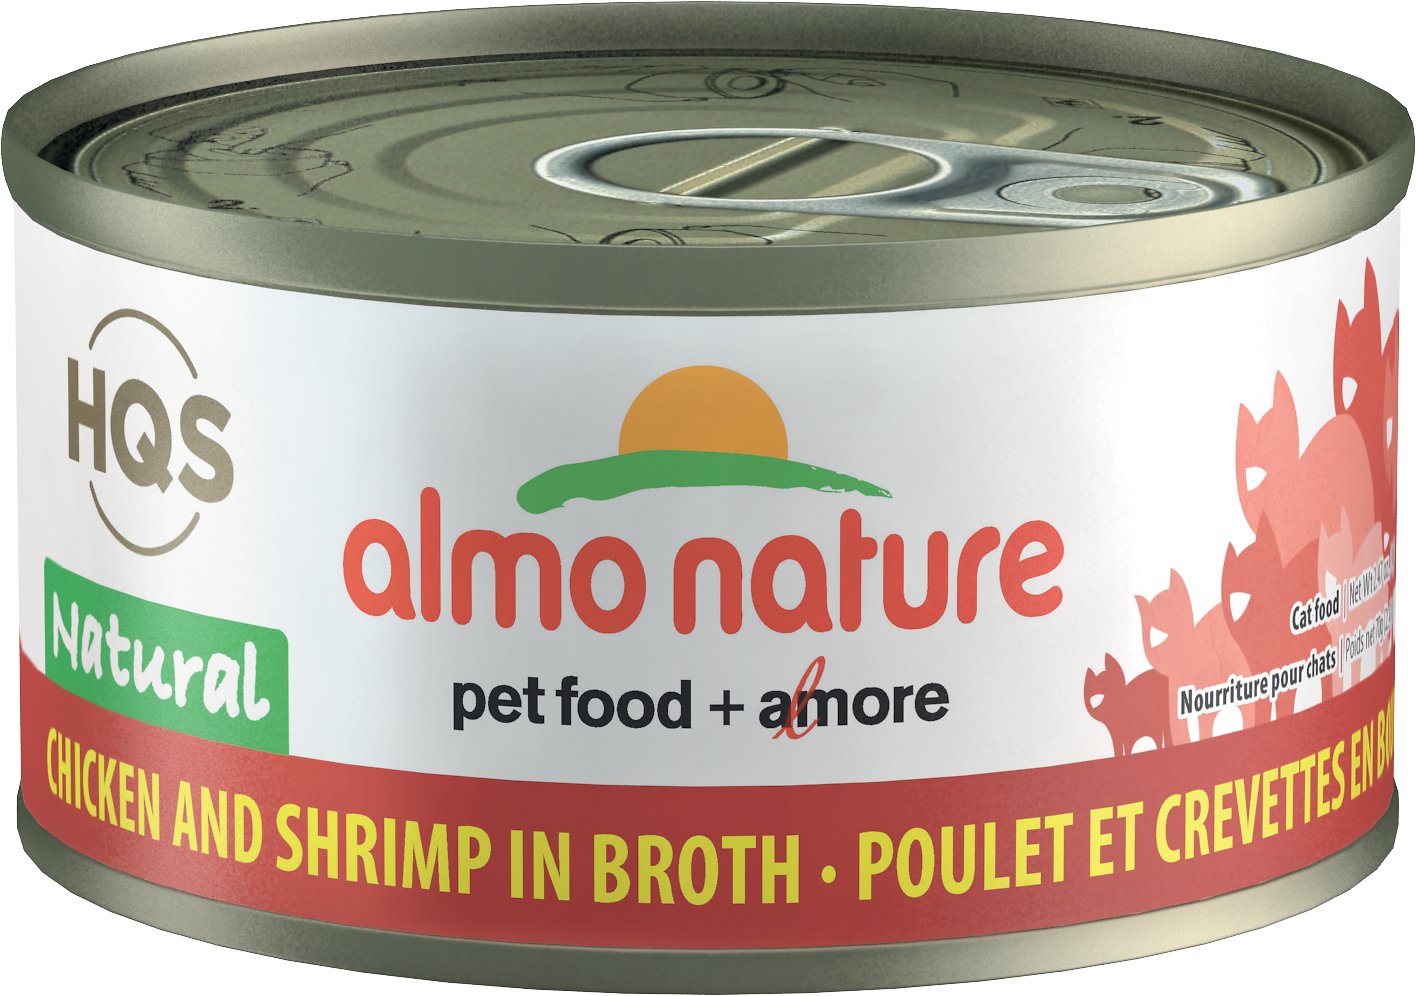 Almo HQS Nature Chicken & Shrimp in Broth GF Canned Cat Food (70g/2.47oz)